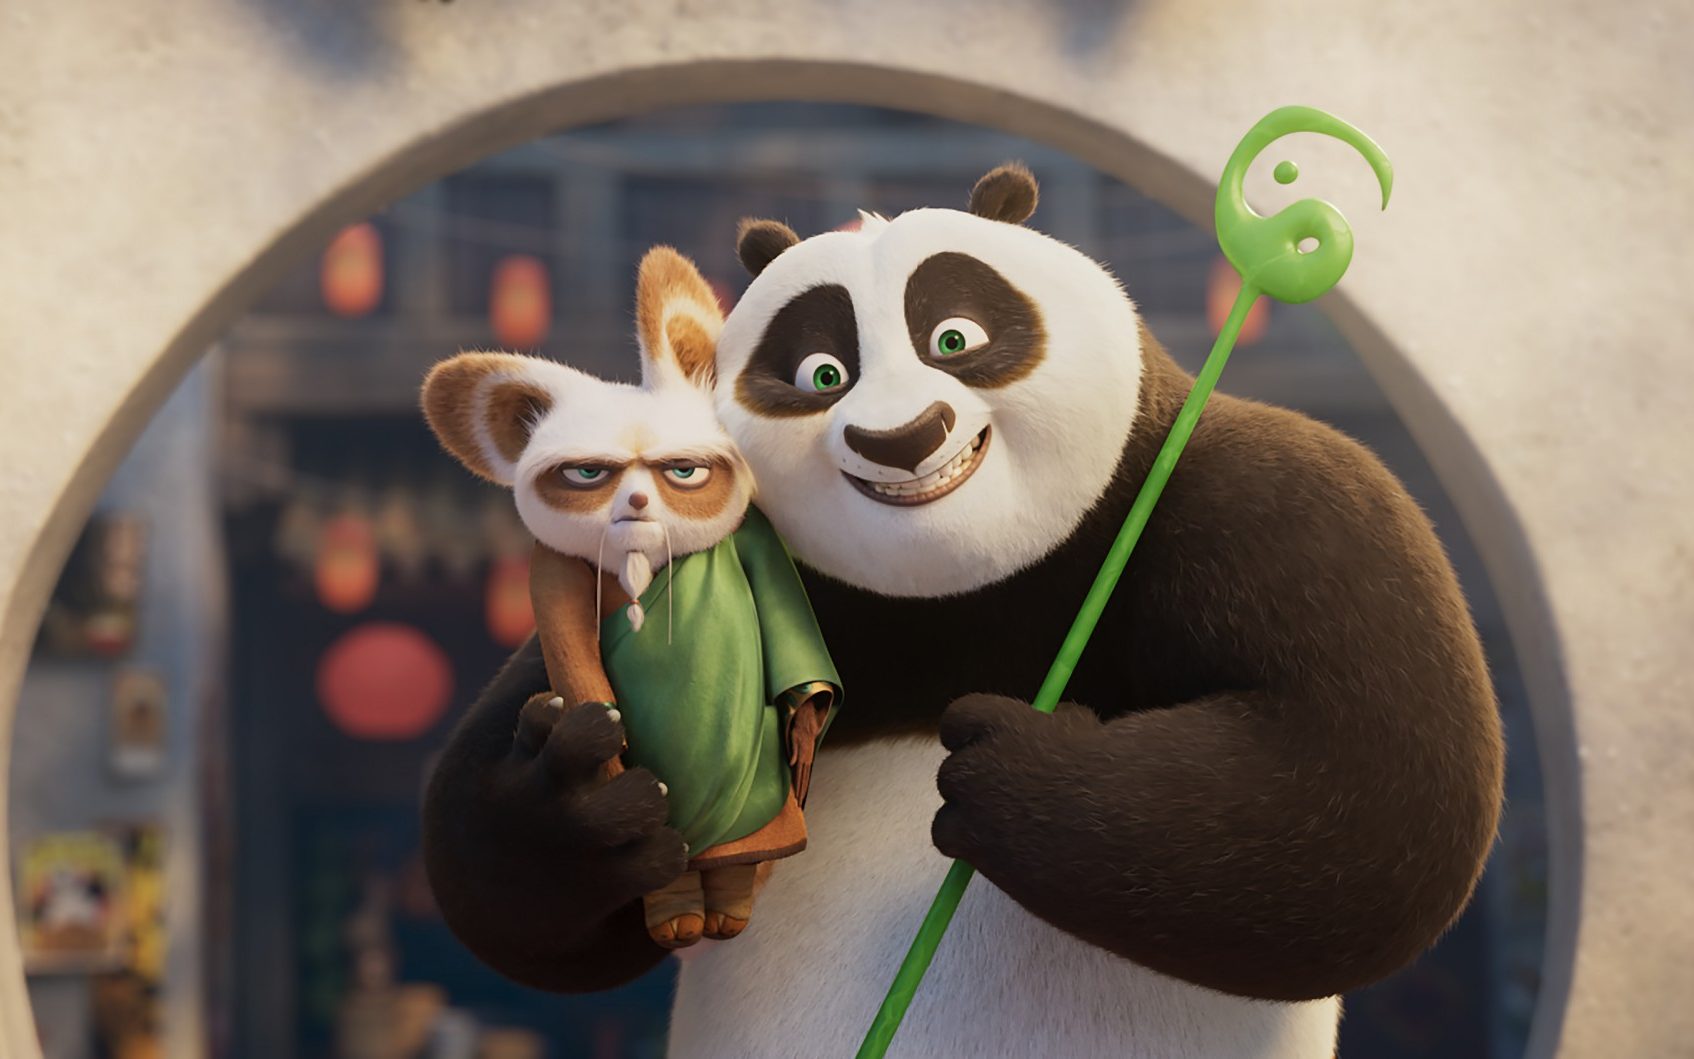 kung fu panda 4: with no angelina jolie, it’s time for this franchise to call it a day